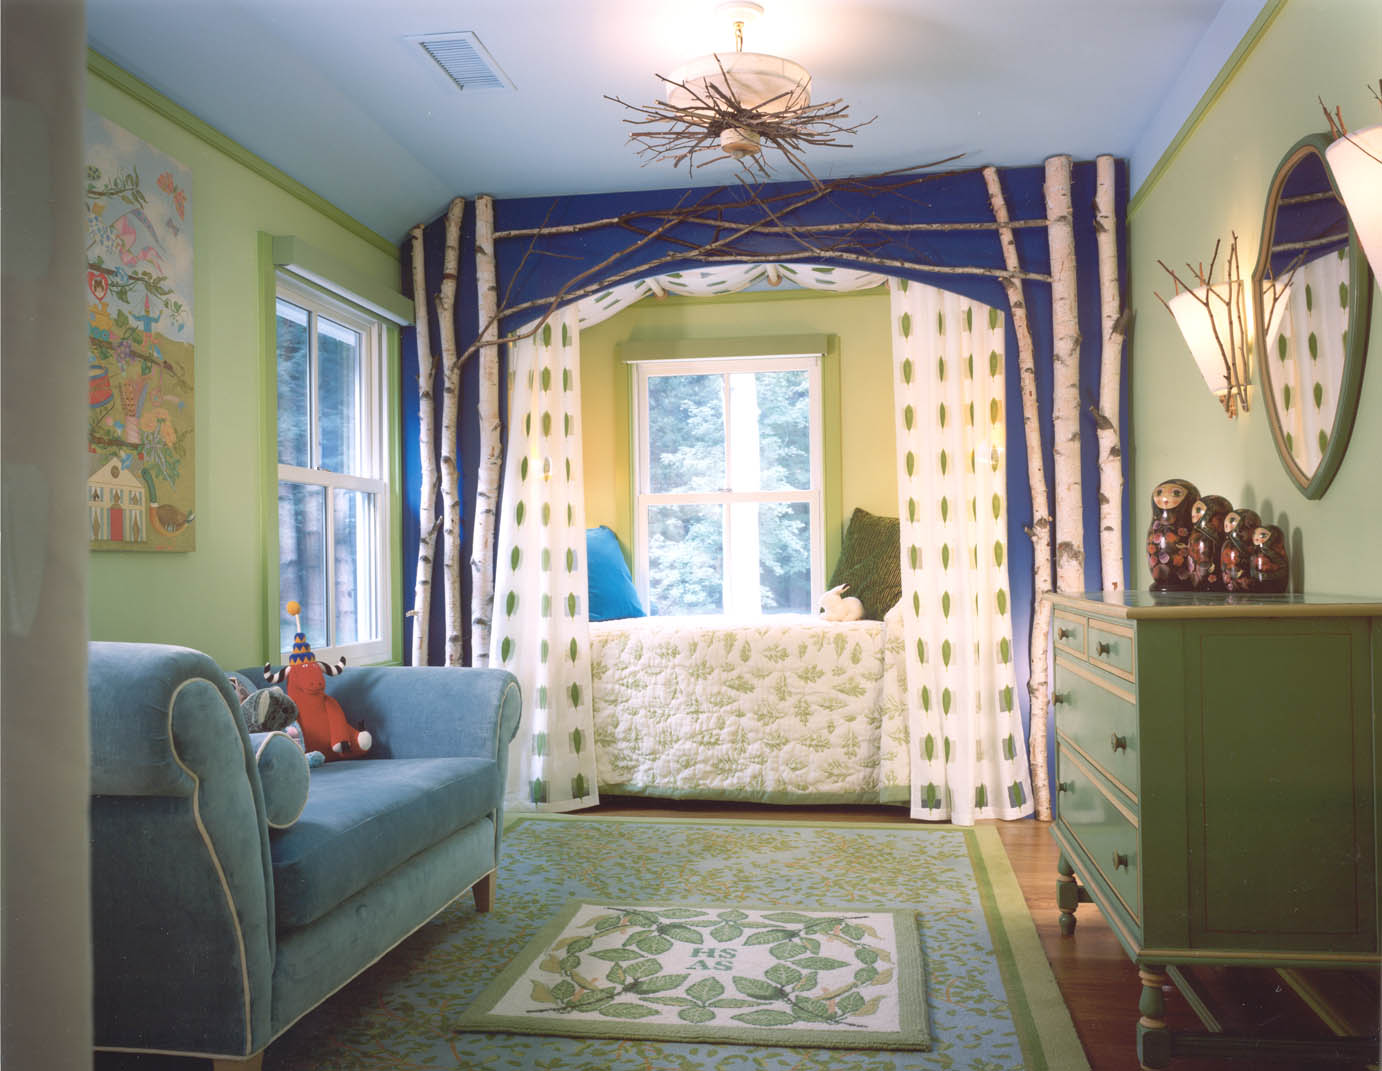 Canopy Bed Travel Jungle Canopy Bed Theme For Travel Teen Room Ideas With Floral Pattern Rug And Vintage Green Armoire Interior Design Beautiful Teen Girl Room Interior Design Embellished With Charming Wall Decor